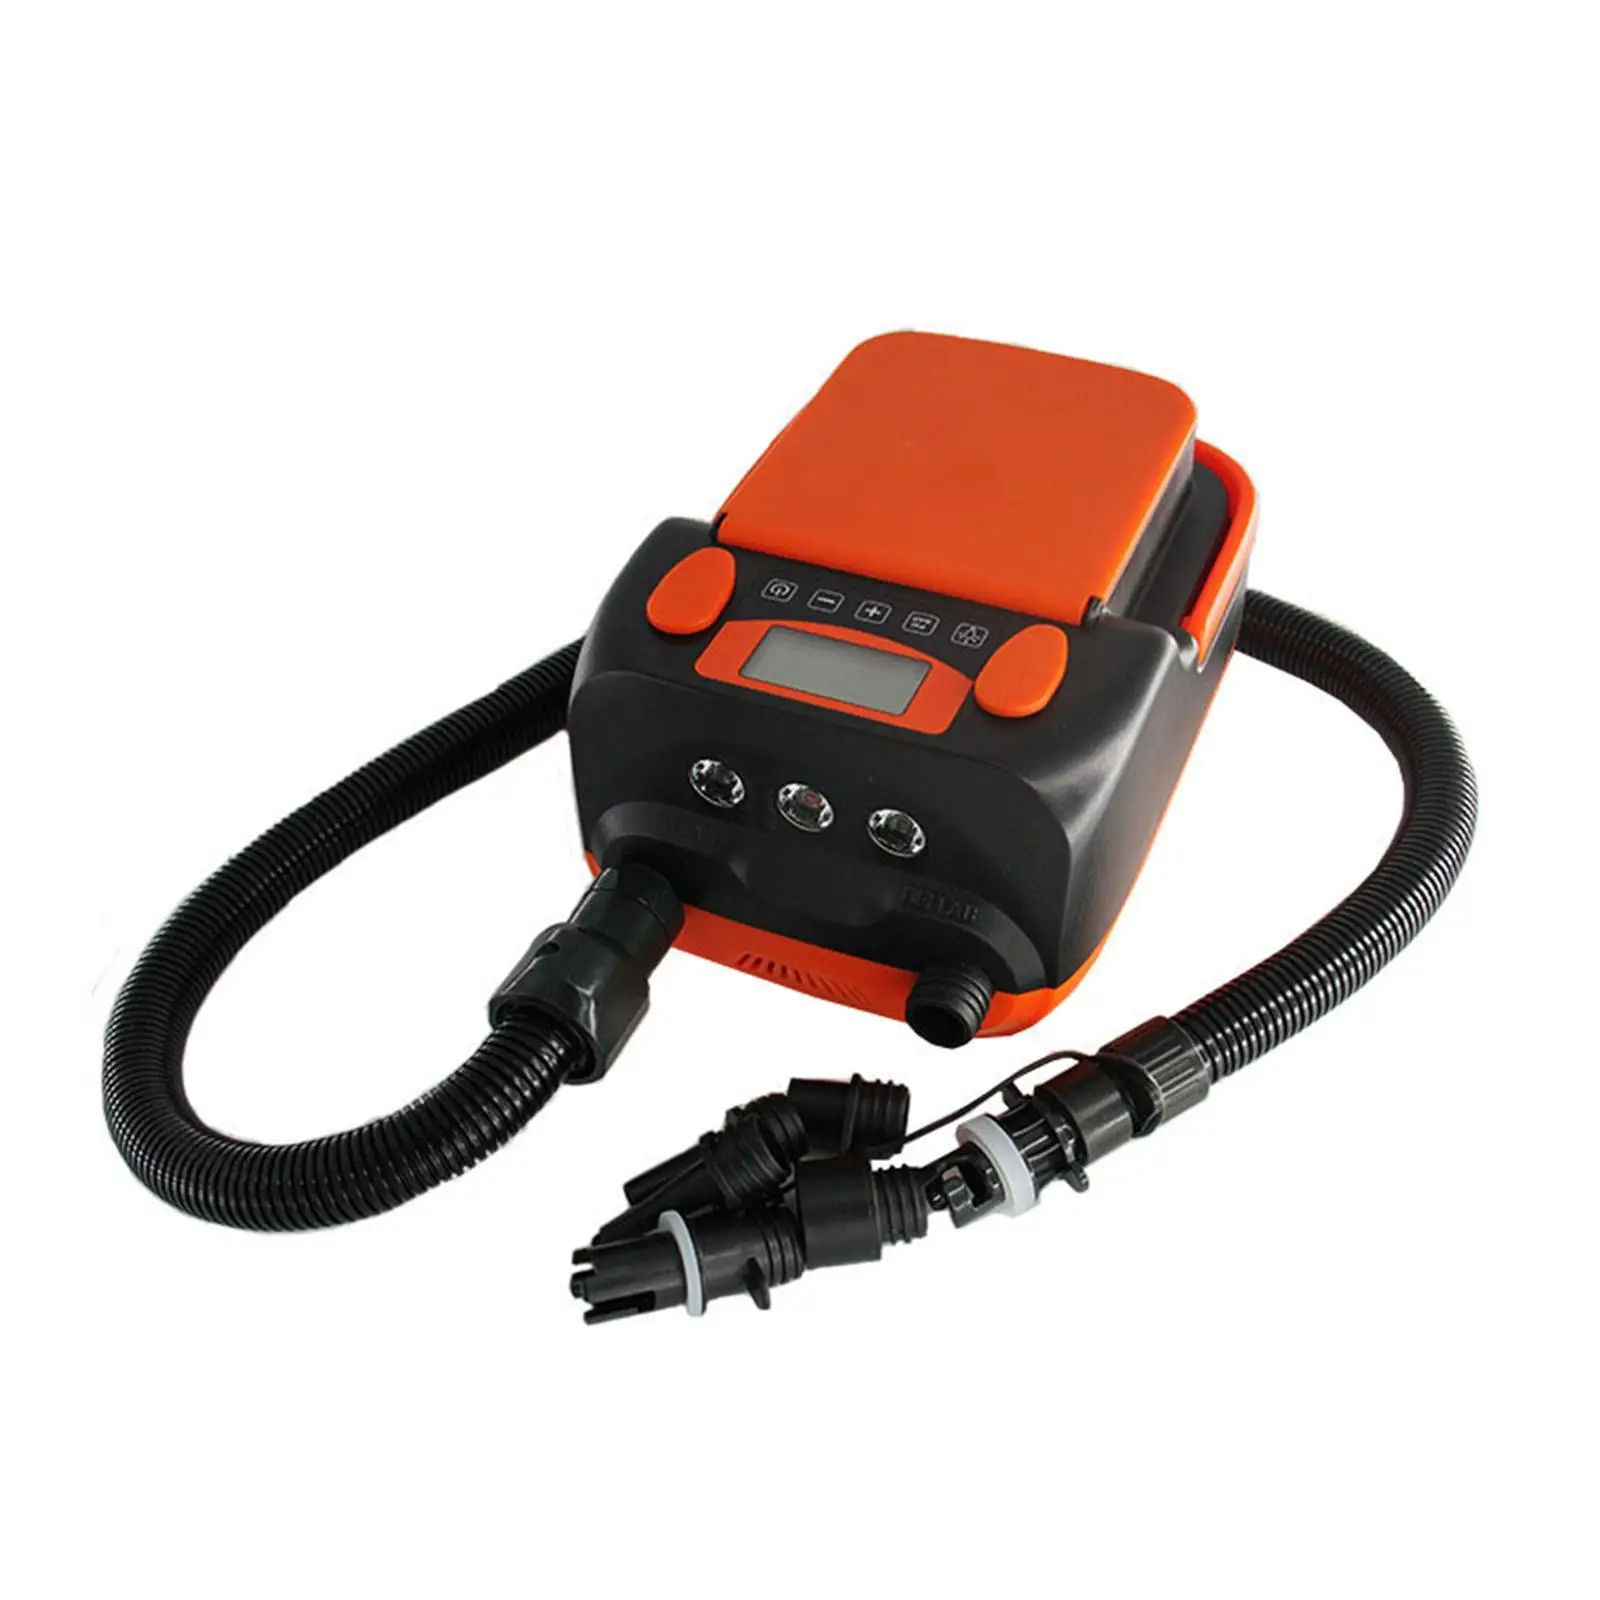 Electric Air Pump 16PSI Portable High Pressure Air Pump Auto-Off Electric Pump Inflator with 5 Nozzles for Inflatable Boat